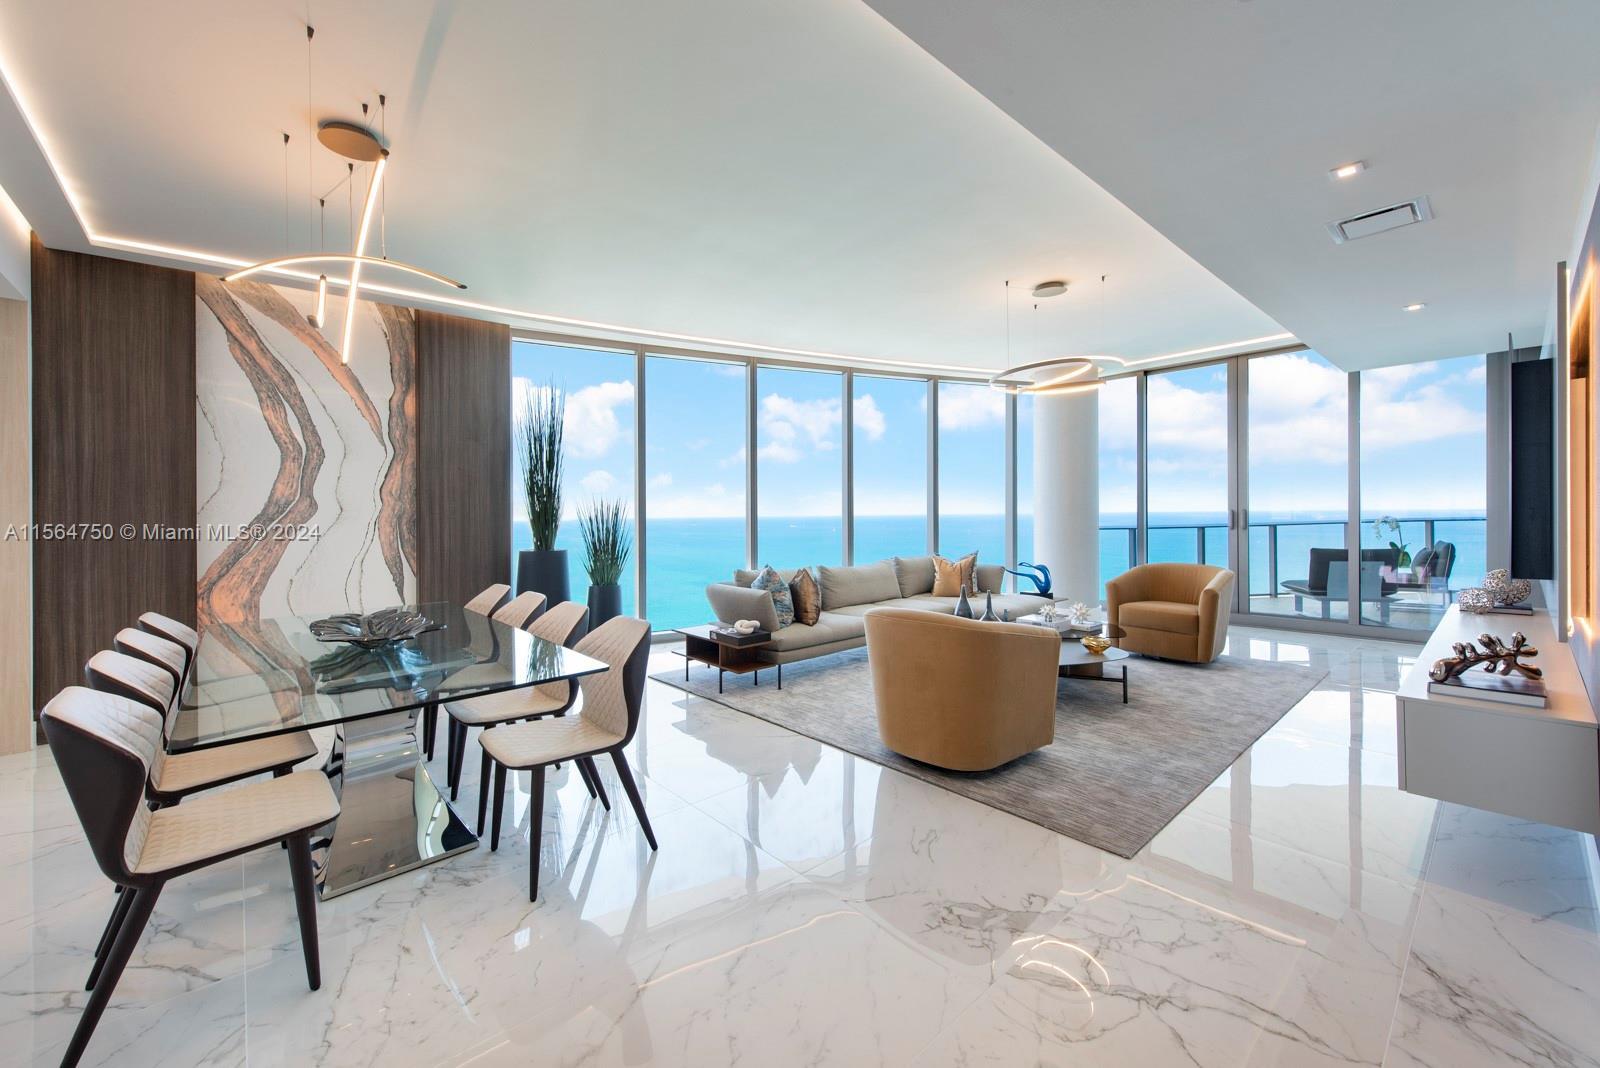 Indulge in luxury at Ritz Carlton Sunny Isles. Meticulously crafted, it offers unrivaled elegance. F